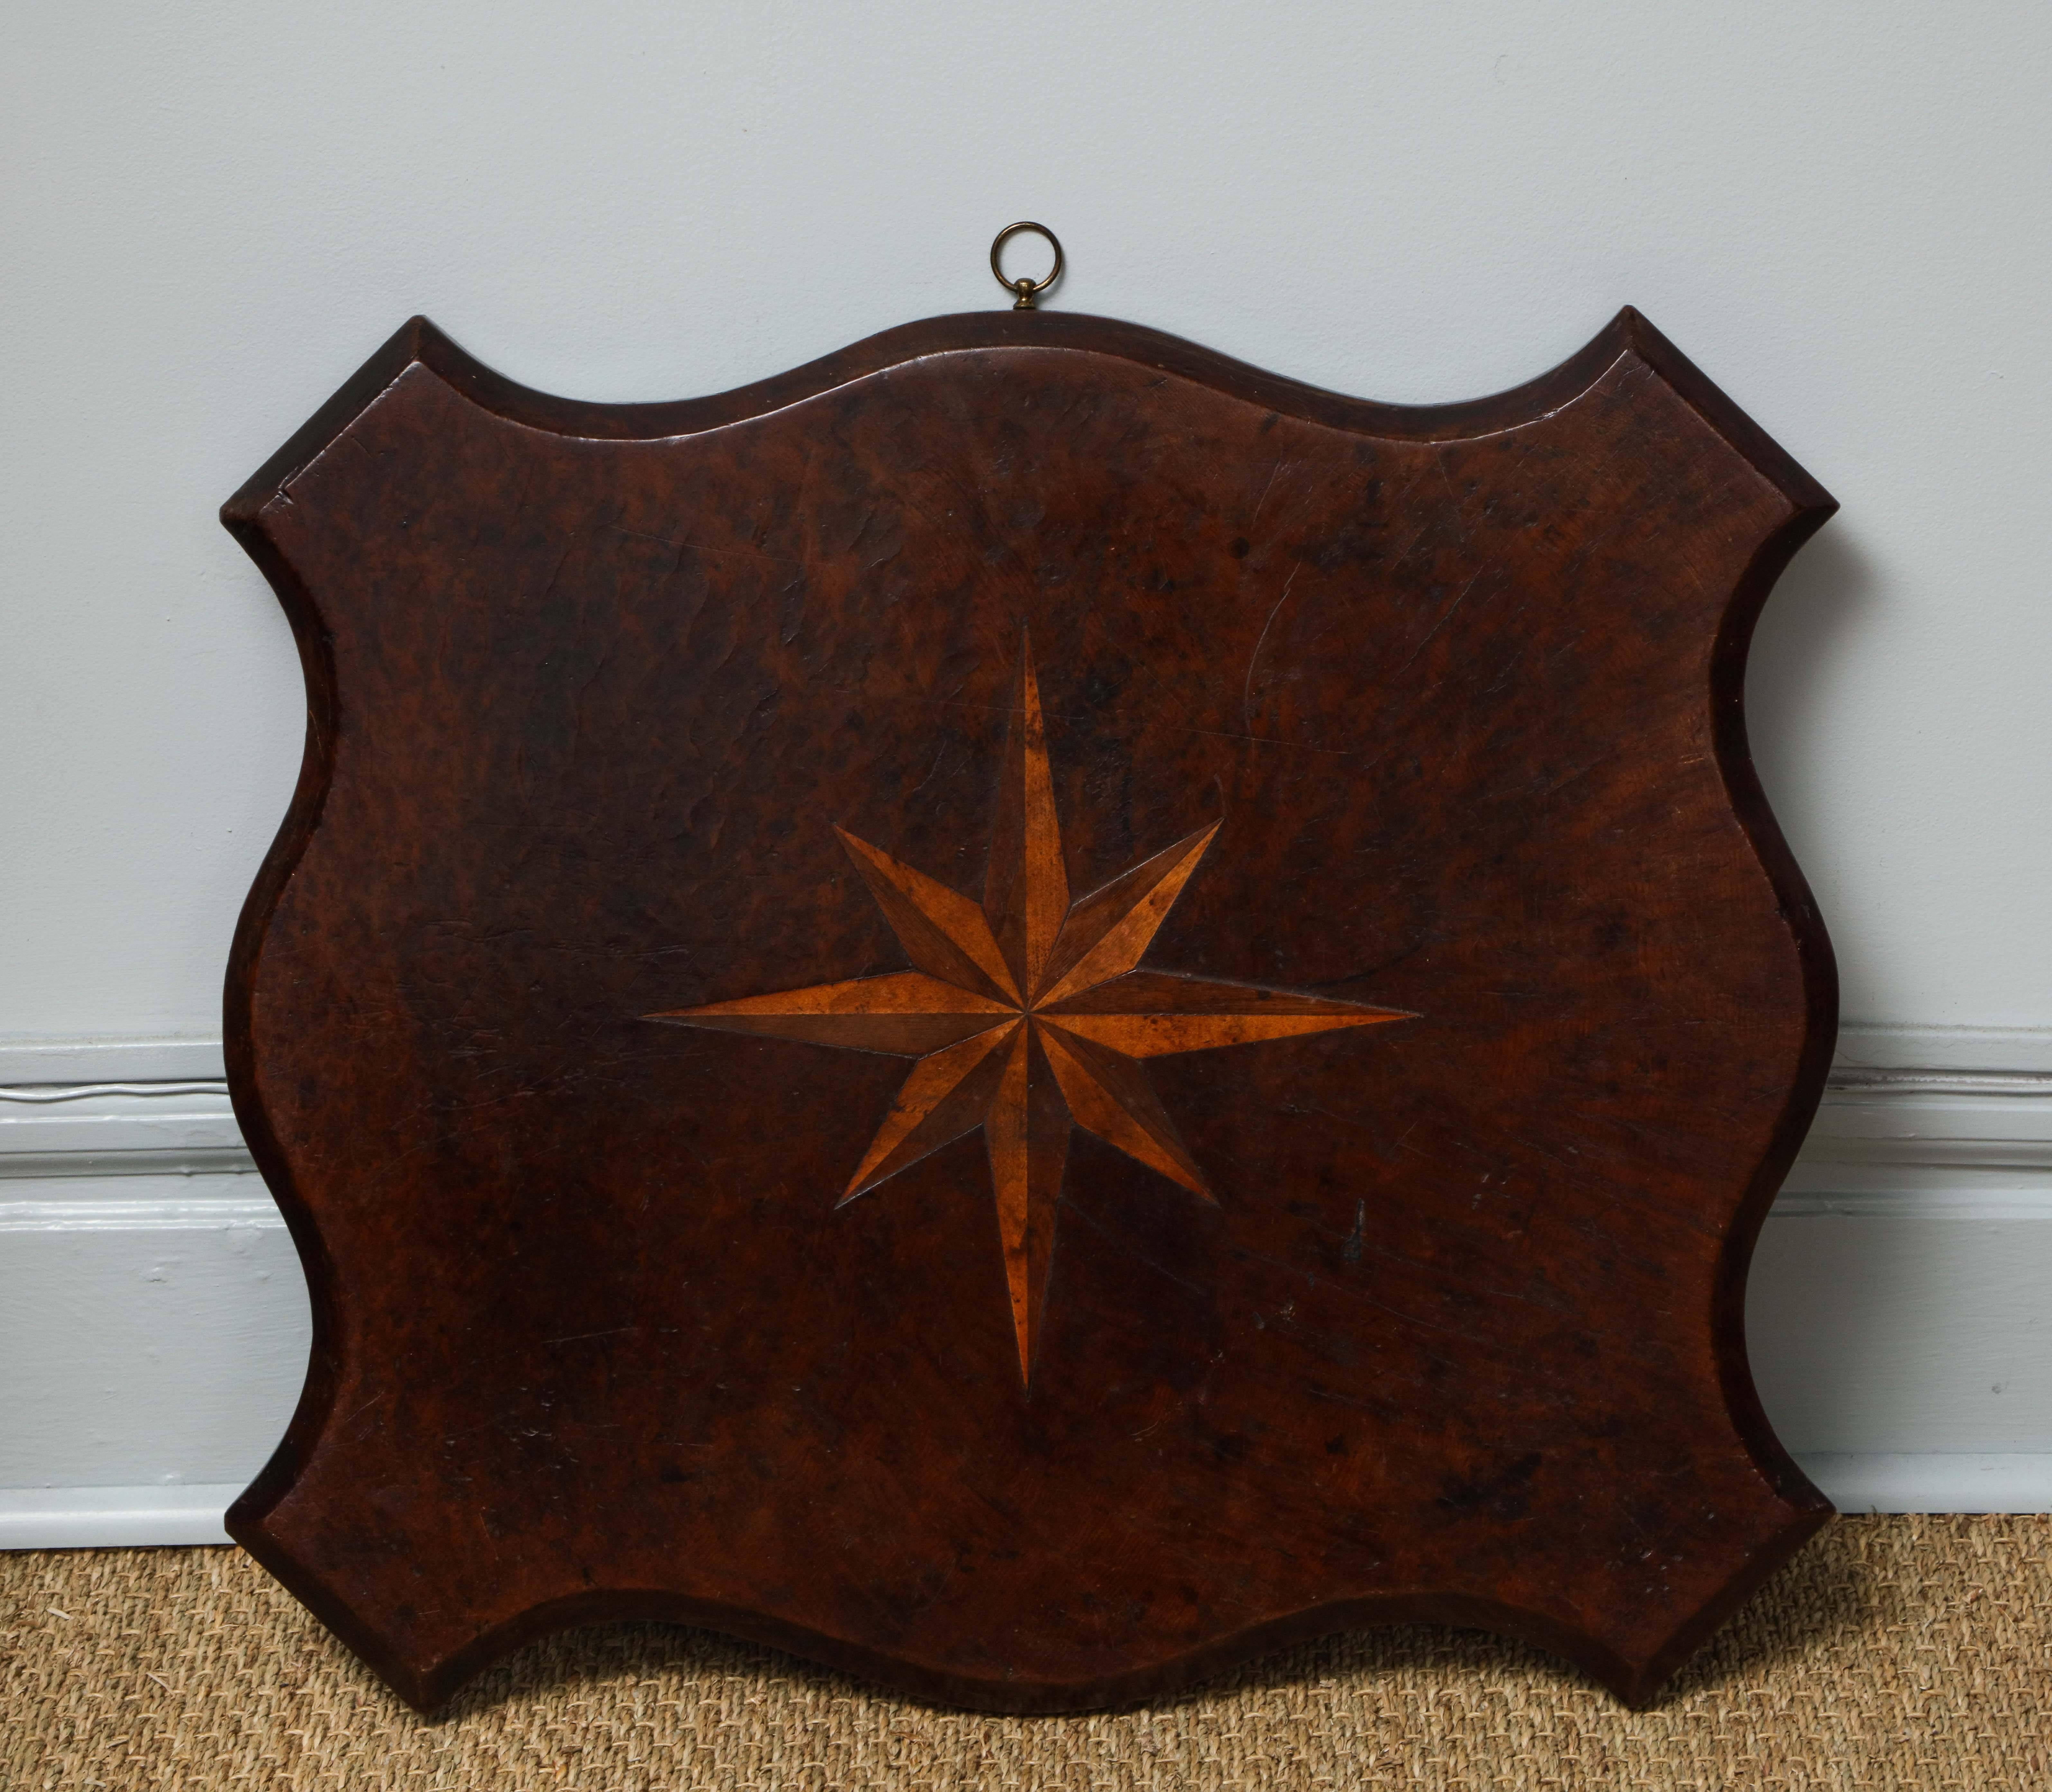 Very fine English early 19th Century solid burl yewwood tabletop with molded edge and scalloped sides with mahogany and sycamore compass star inlay, the whole possessing very good, rich patination.